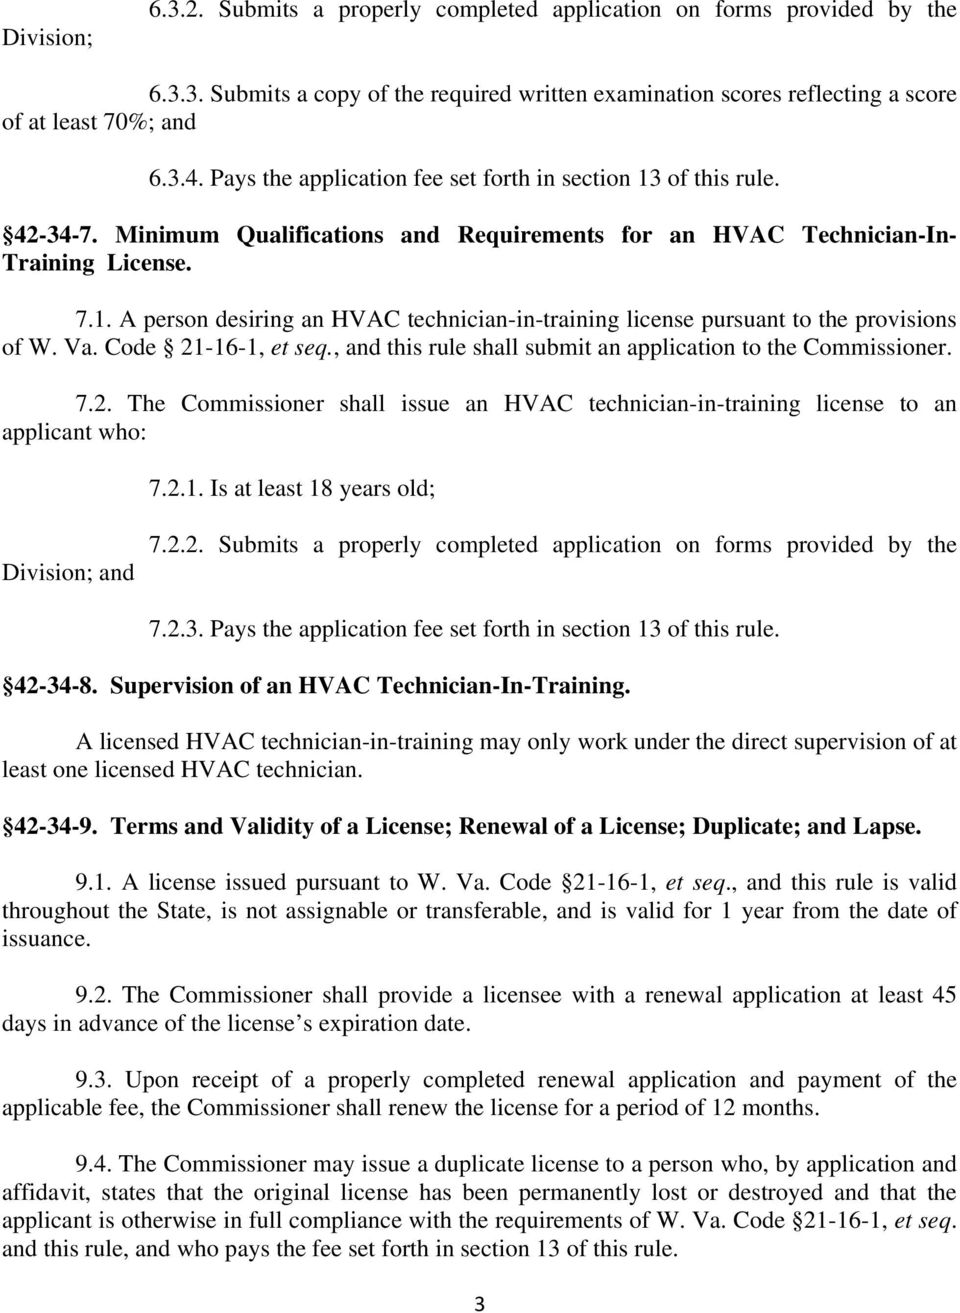 Va. Code 21-16-1, et seq., and this rule shall submit an application to the Commissioner. 7.2. The Commissioner shall issue an HVAC technician-in-training license to an applicant who: 7.2.1. Is at least 18 years old; Division; and 7.